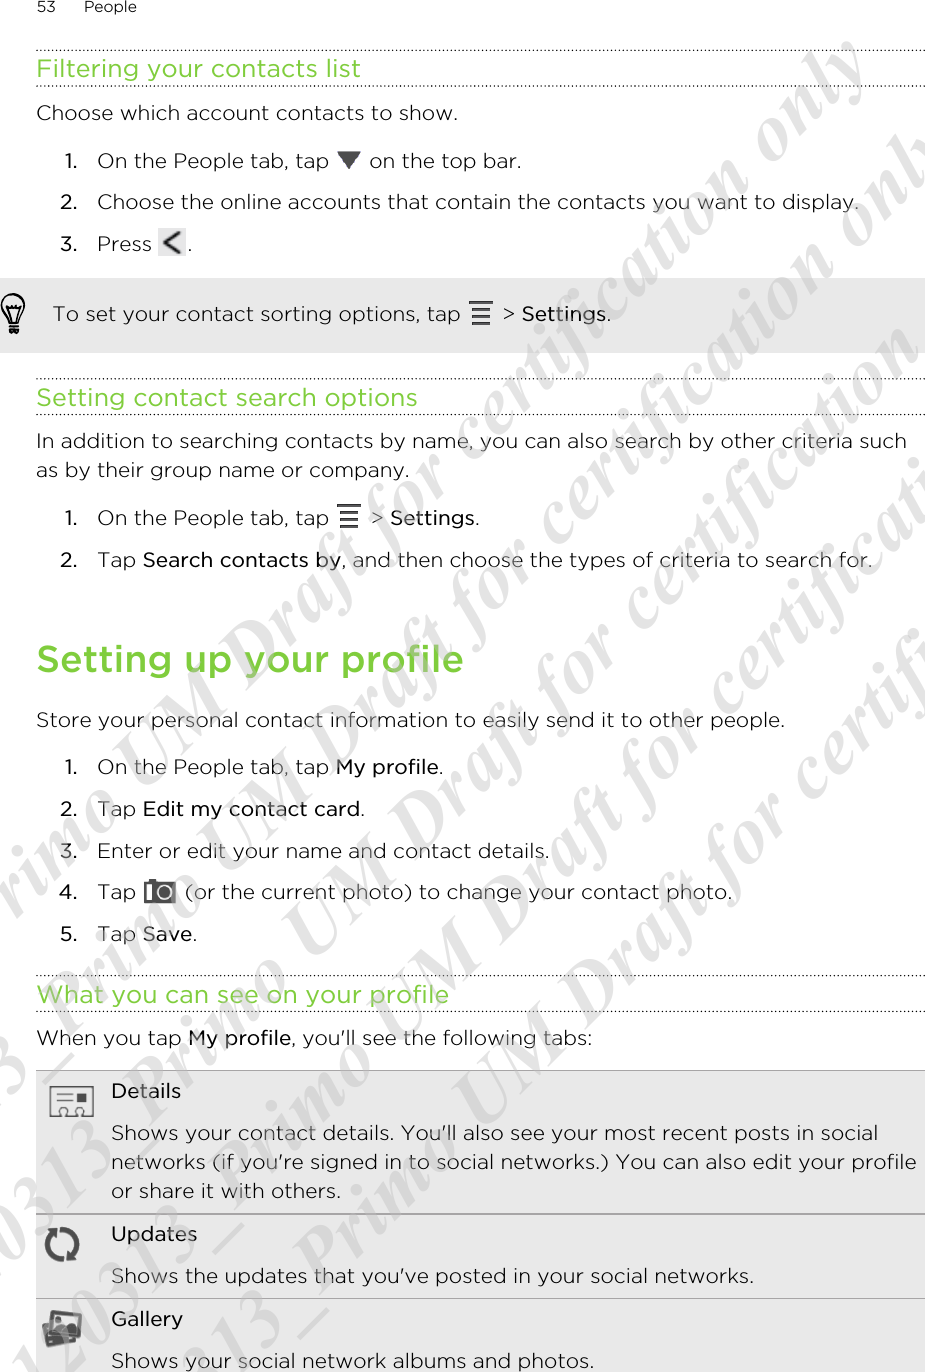 Filtering your contacts listChoose which account contacts to show.1. On the People tab, tap   on the top bar.2. Choose the online accounts that contain the contacts you want to display.3. Press  .To set your contact sorting options, tap   &gt; Settings.Setting contact search optionsIn addition to searching contacts by name, you can also search by other criteria suchas by their group name or company.1. On the People tab, tap   &gt; Settings.2. Tap Search contacts by, and then choose the types of criteria to search for.Setting up your profileStore your personal contact information to easily send it to other people.1. On the People tab, tap My profile.2. Tap Edit my contact card.3. Enter or edit your name and contact details.4. Tap   (or the current photo) to change your contact photo.5. Tap Save.What you can see on your profileWhen you tap My profile, you&apos;ll see the following tabs:DetailsShows your contact details. You&apos;ll also see your most recent posts in socialnetworks (if you&apos;re signed in to social networks.) You can also edit your profileor share it with others.UpdatesShows the updates that you&apos;ve posted in your social networks.GalleryShows your social network albums and photos.53 People20120313_Primo UM Draft for certification only 20120313_Primo UM Draft for certification only 20120313_Primo UM Draft for certification only 20120313_Primo UM Draft for certification only 20120313_Primo UM Draft for certification only